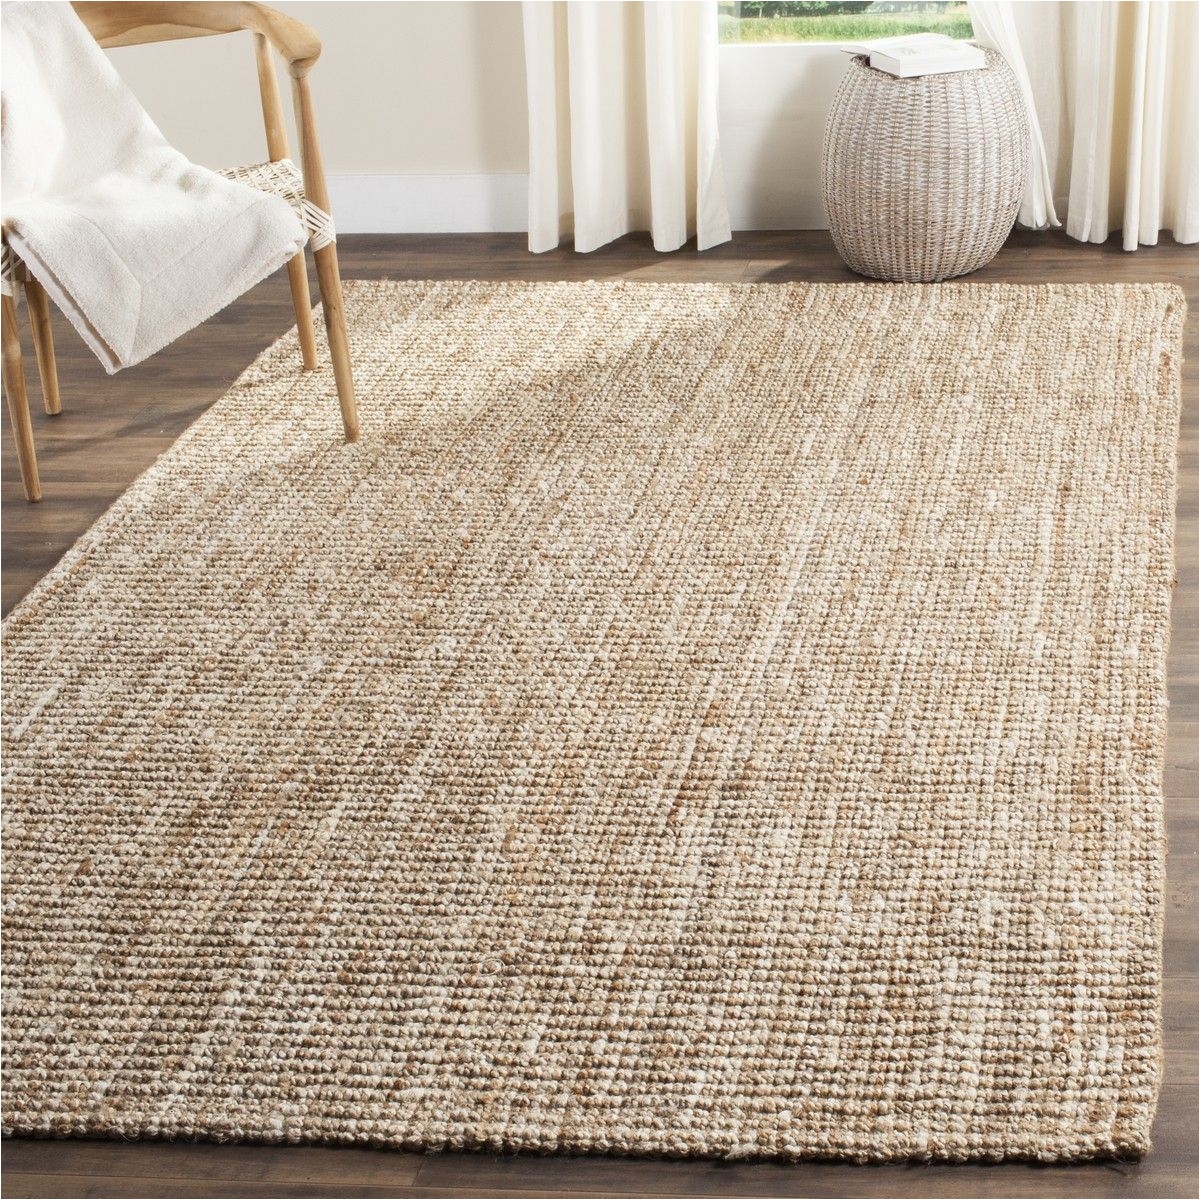 nf447n rug from natural fiber collection hand woven with natural fibers this casual area rug is innately soft and durable this densely woven rug will add